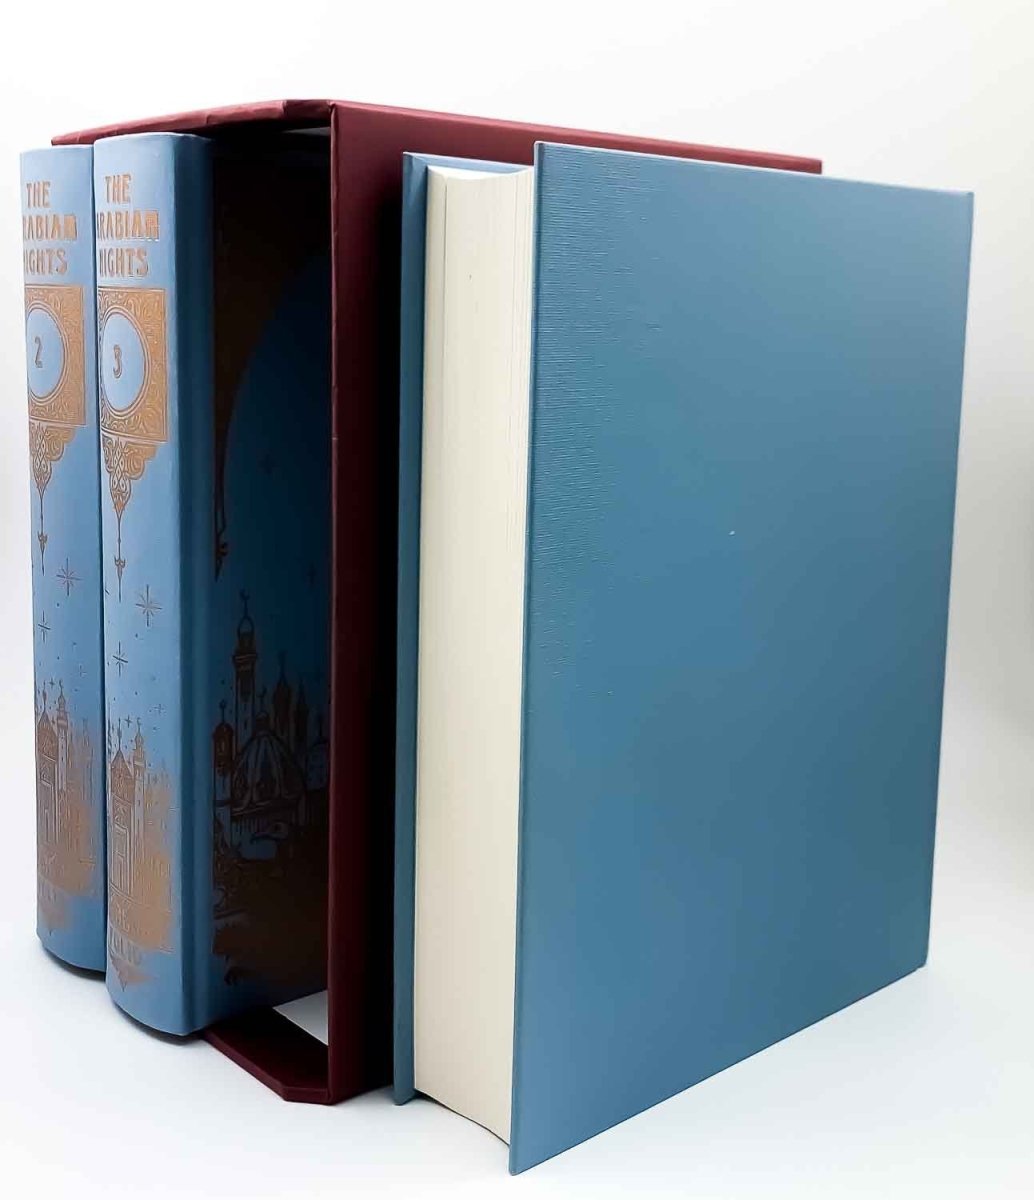 Mardrus, J C - The Arabian Nights : The Book of the Thousand Nights and One Night - 6 Volume Set | image4